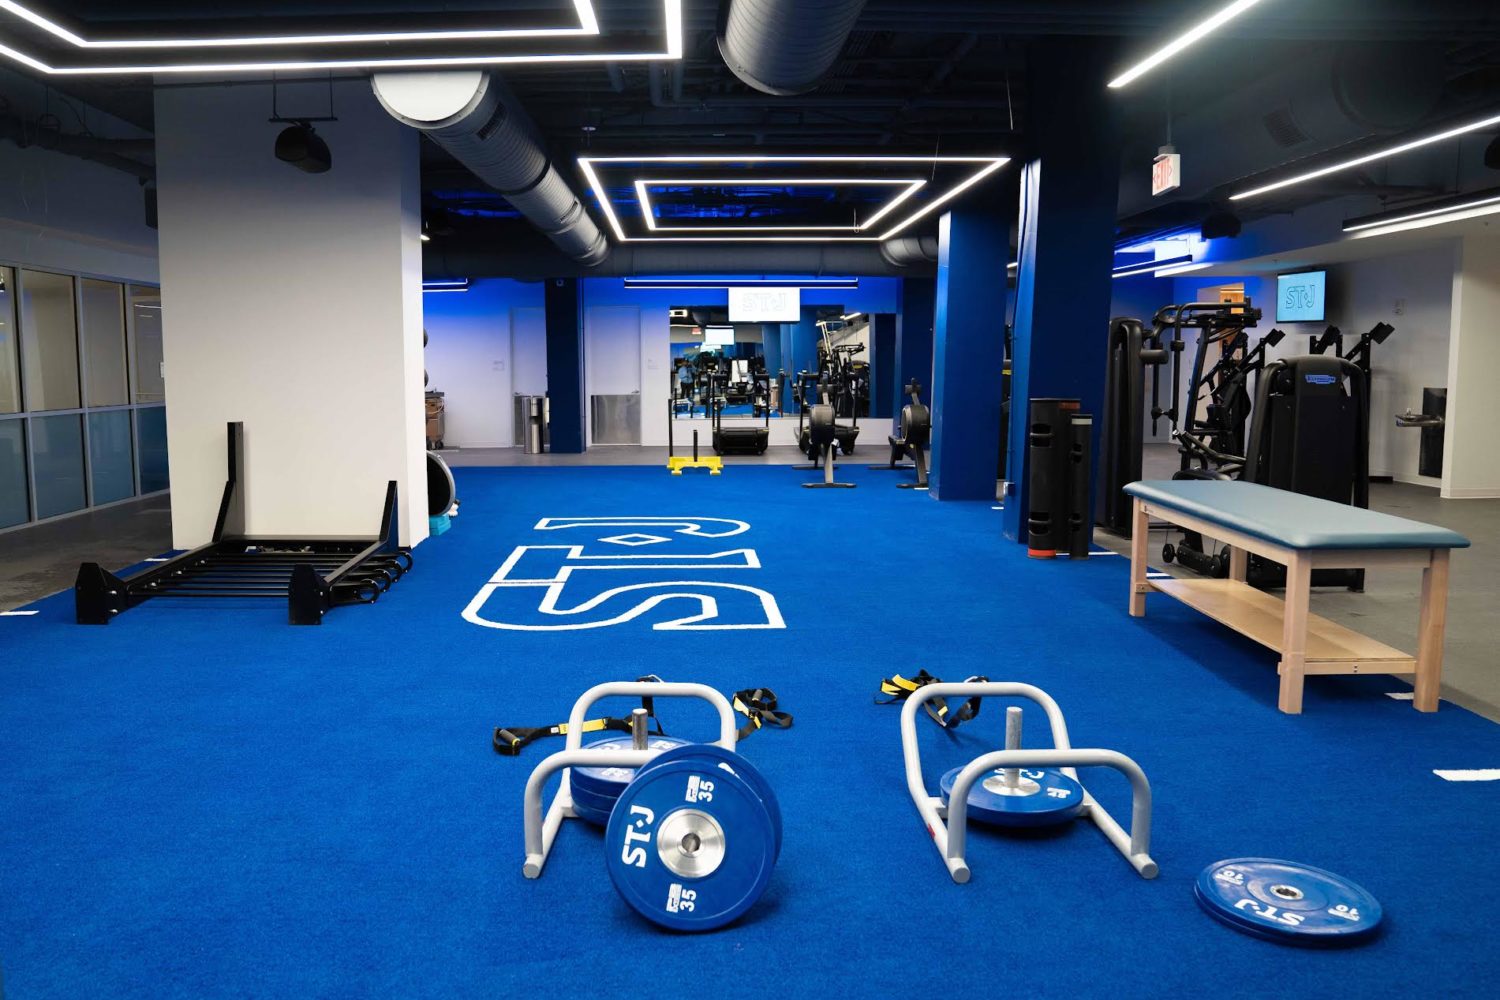 The 50,000-square-foot facility features gym equipment, a lap pool, and turf fields. Photo courtesy of the St. James.